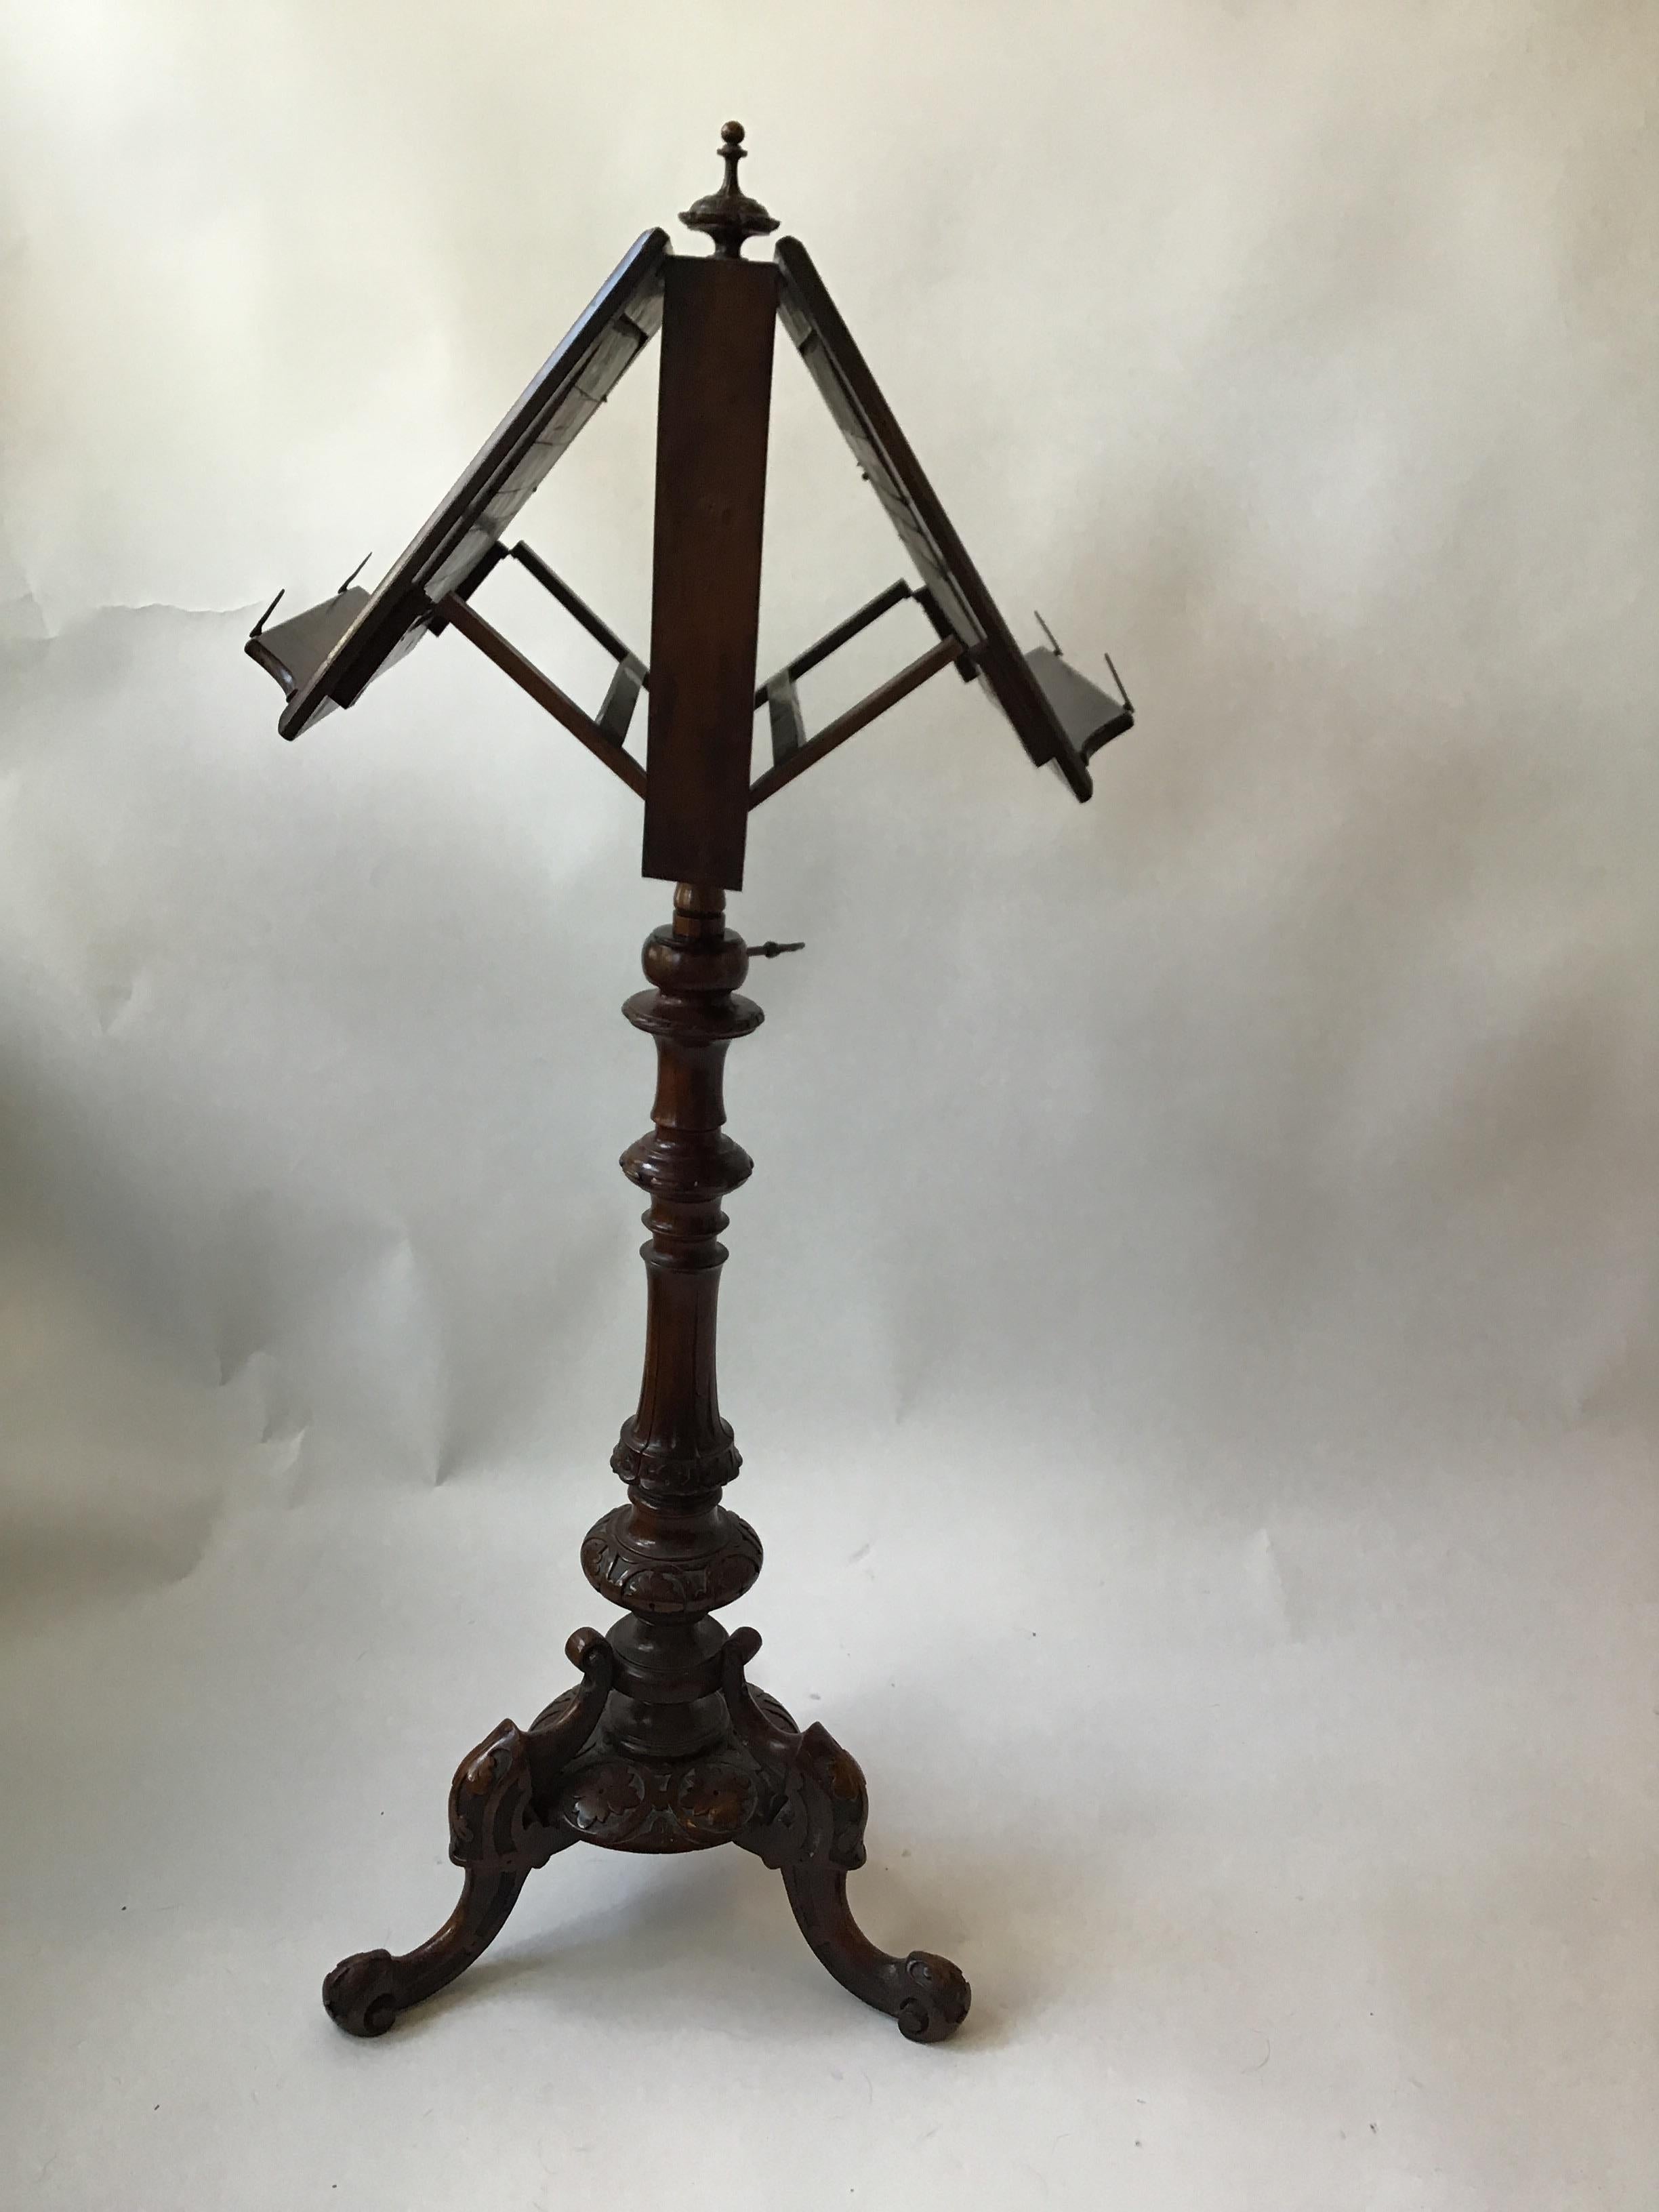 1880s English double sided inlaid wood music stand.